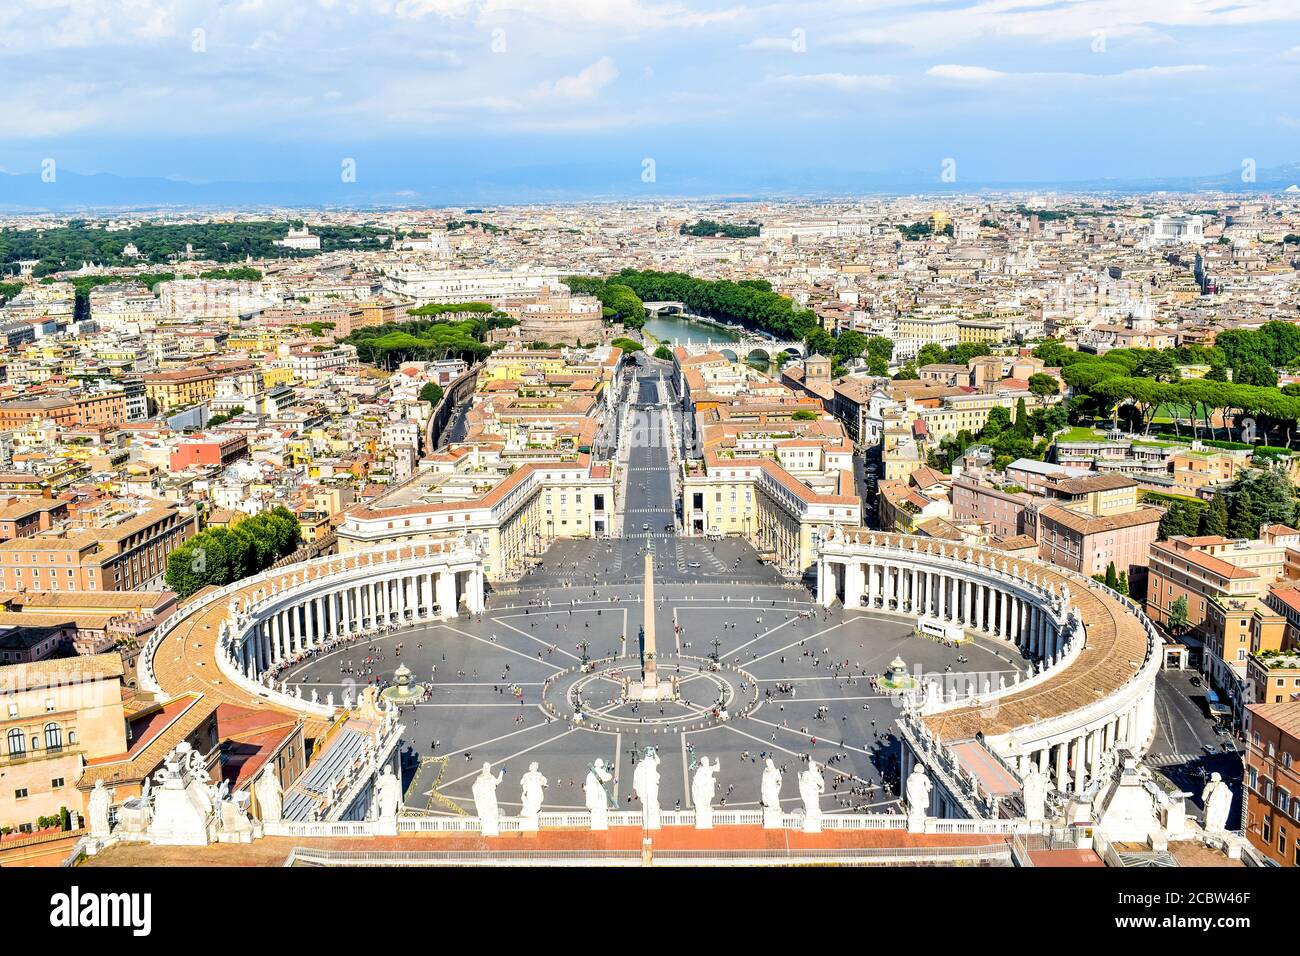 View of St. Peter's Square from St. Peter's Dome Stock Photo